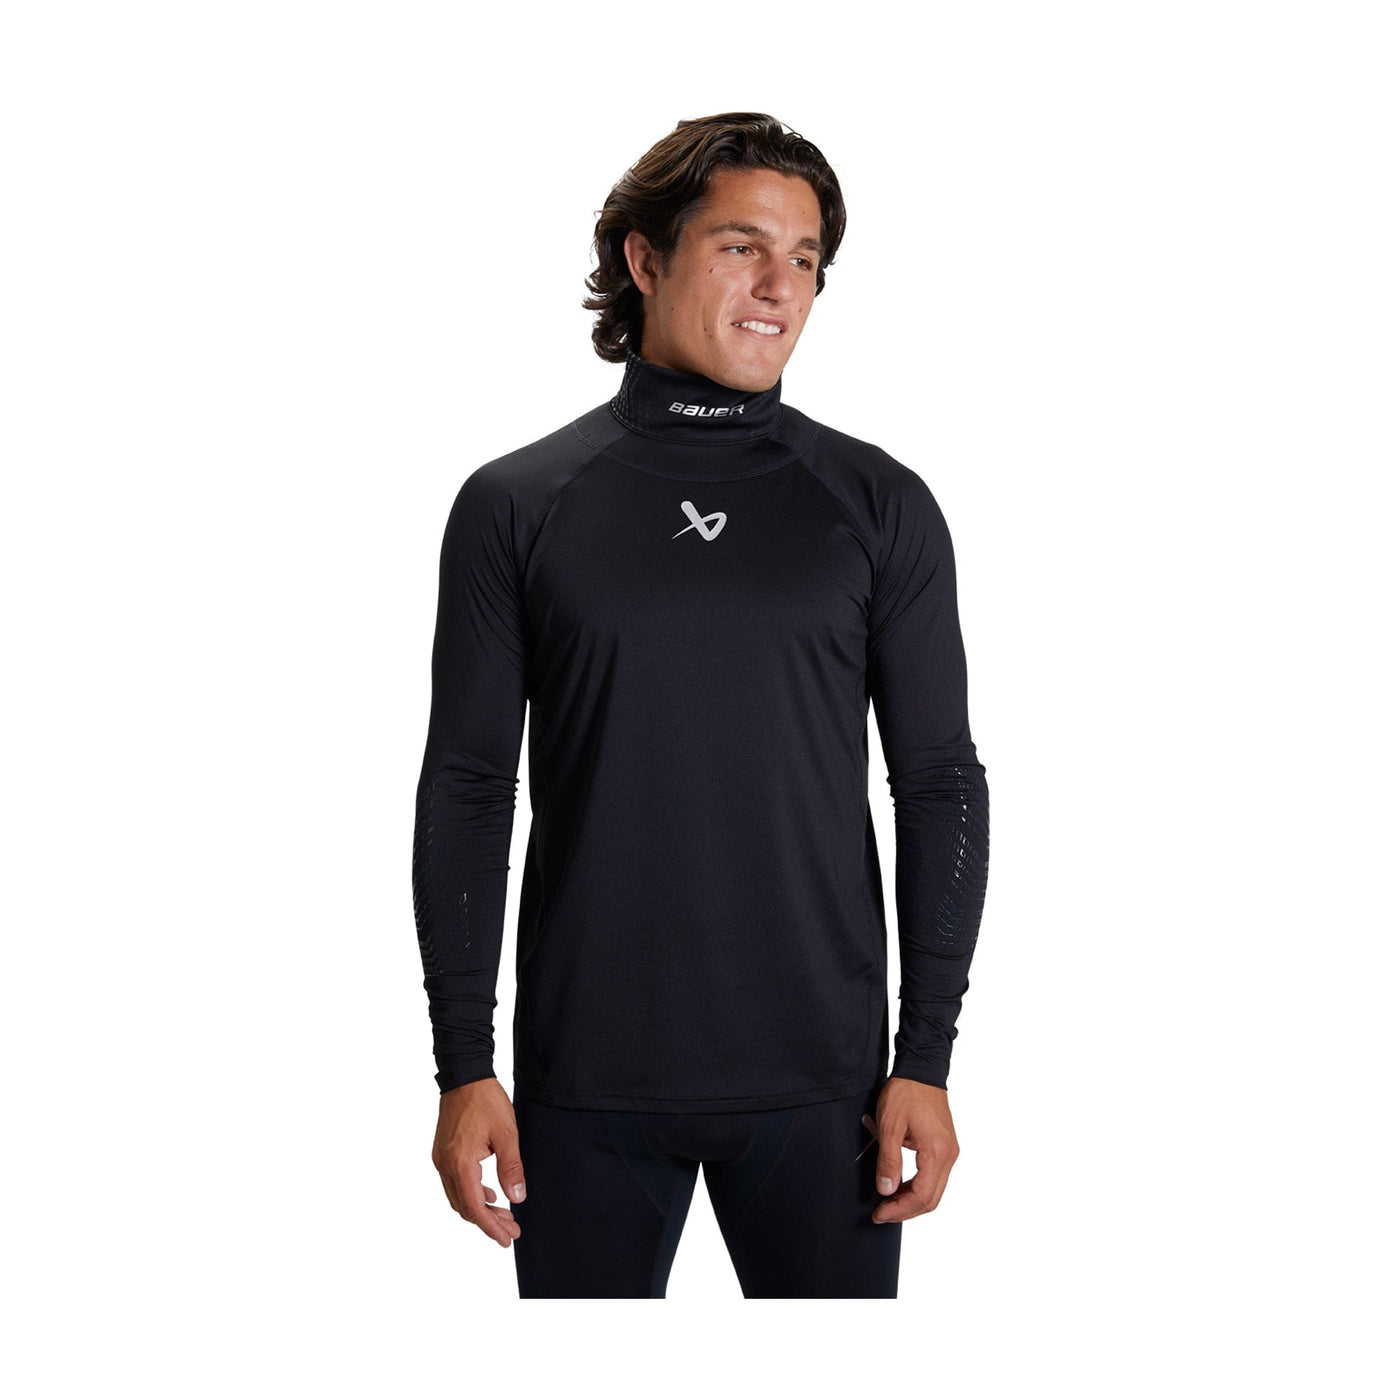 Bauer Pro NeckProtect Longsleeve Senior Neck Guard Shirt - The Hockey Shop Source For Sports